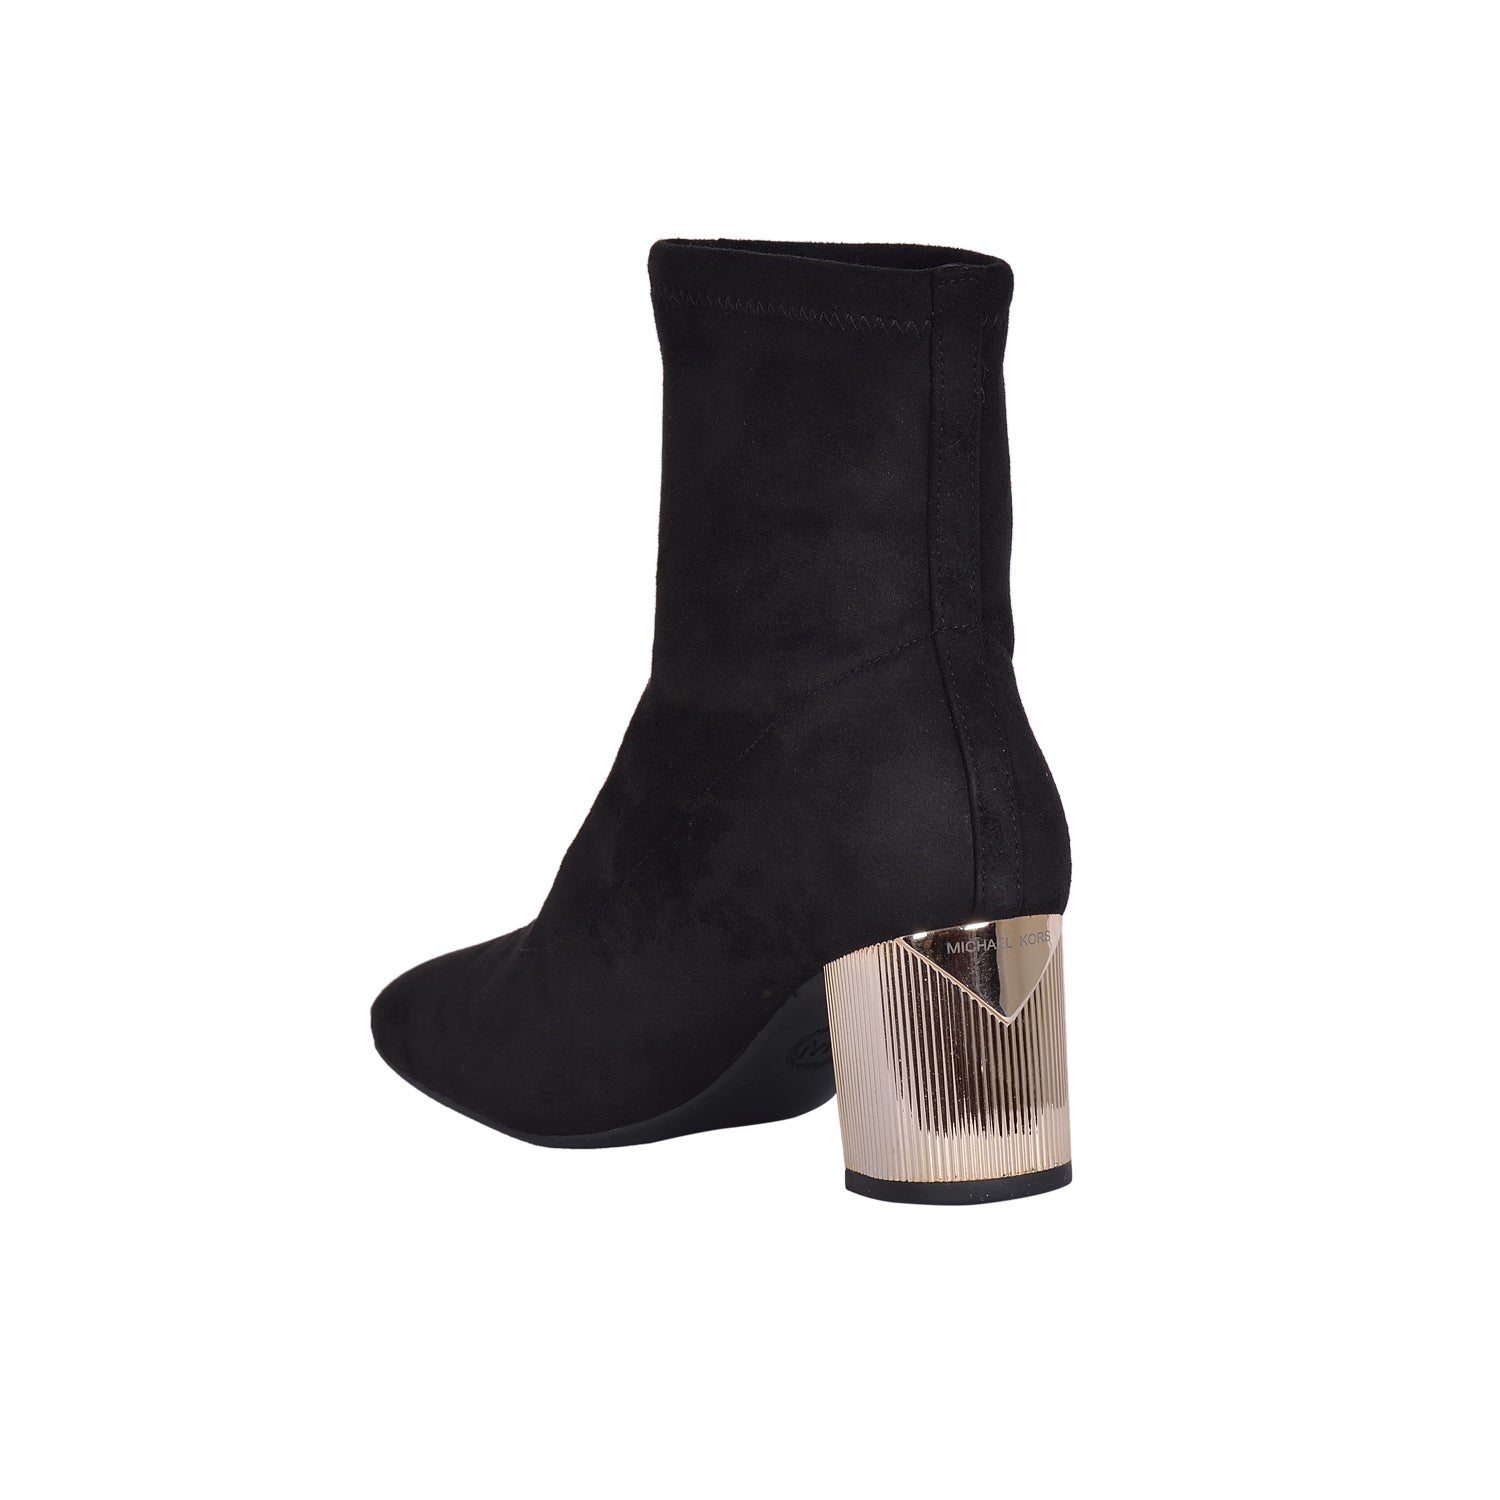 MICHAEL KORS Black Leather Ankle Boots